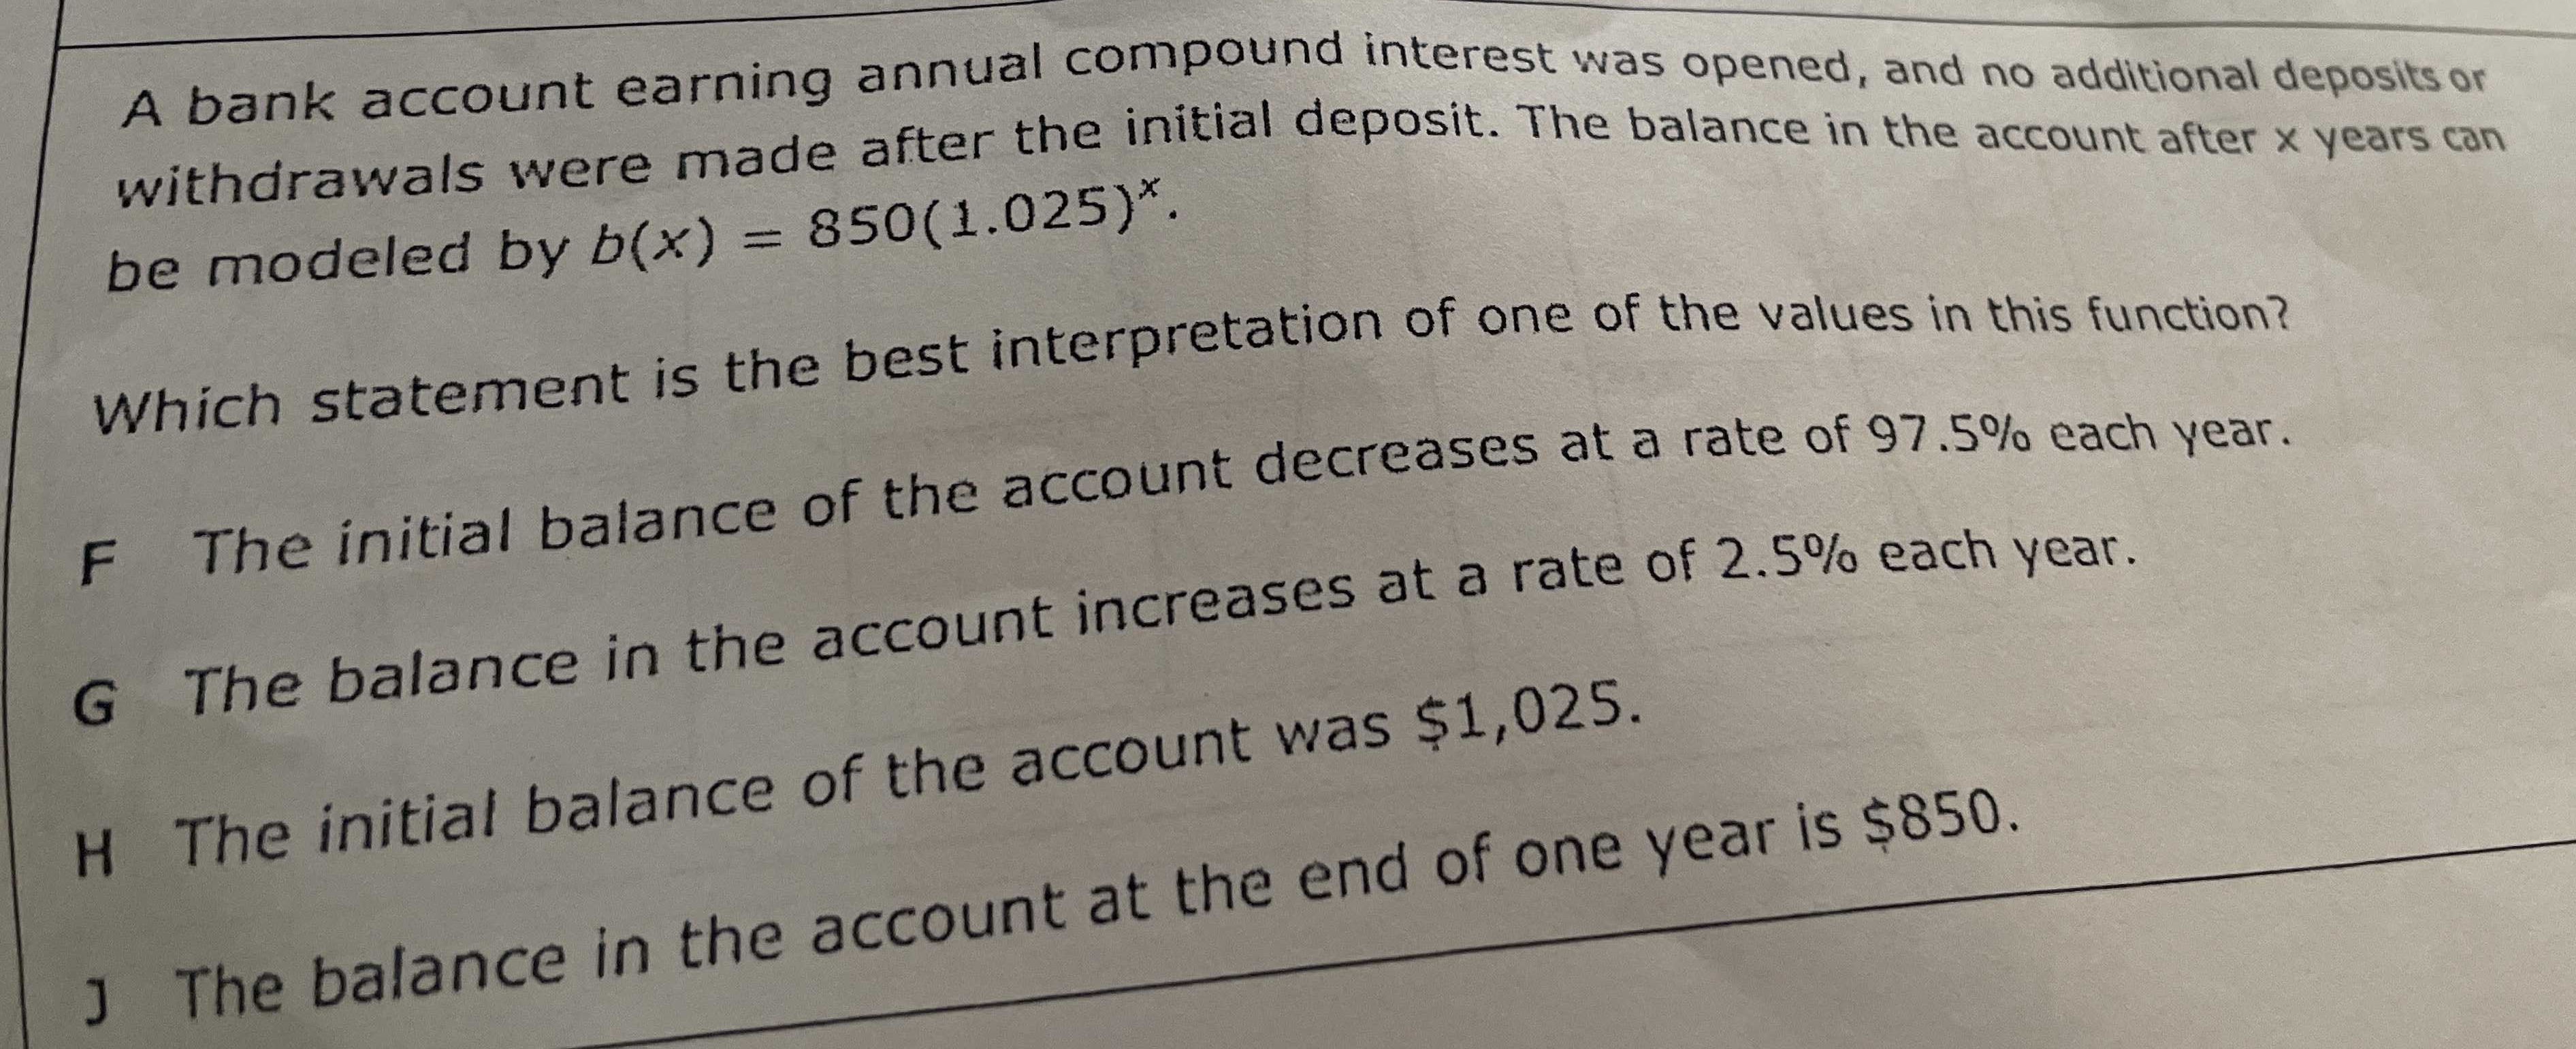 A bank account earning annual compound interest wa...